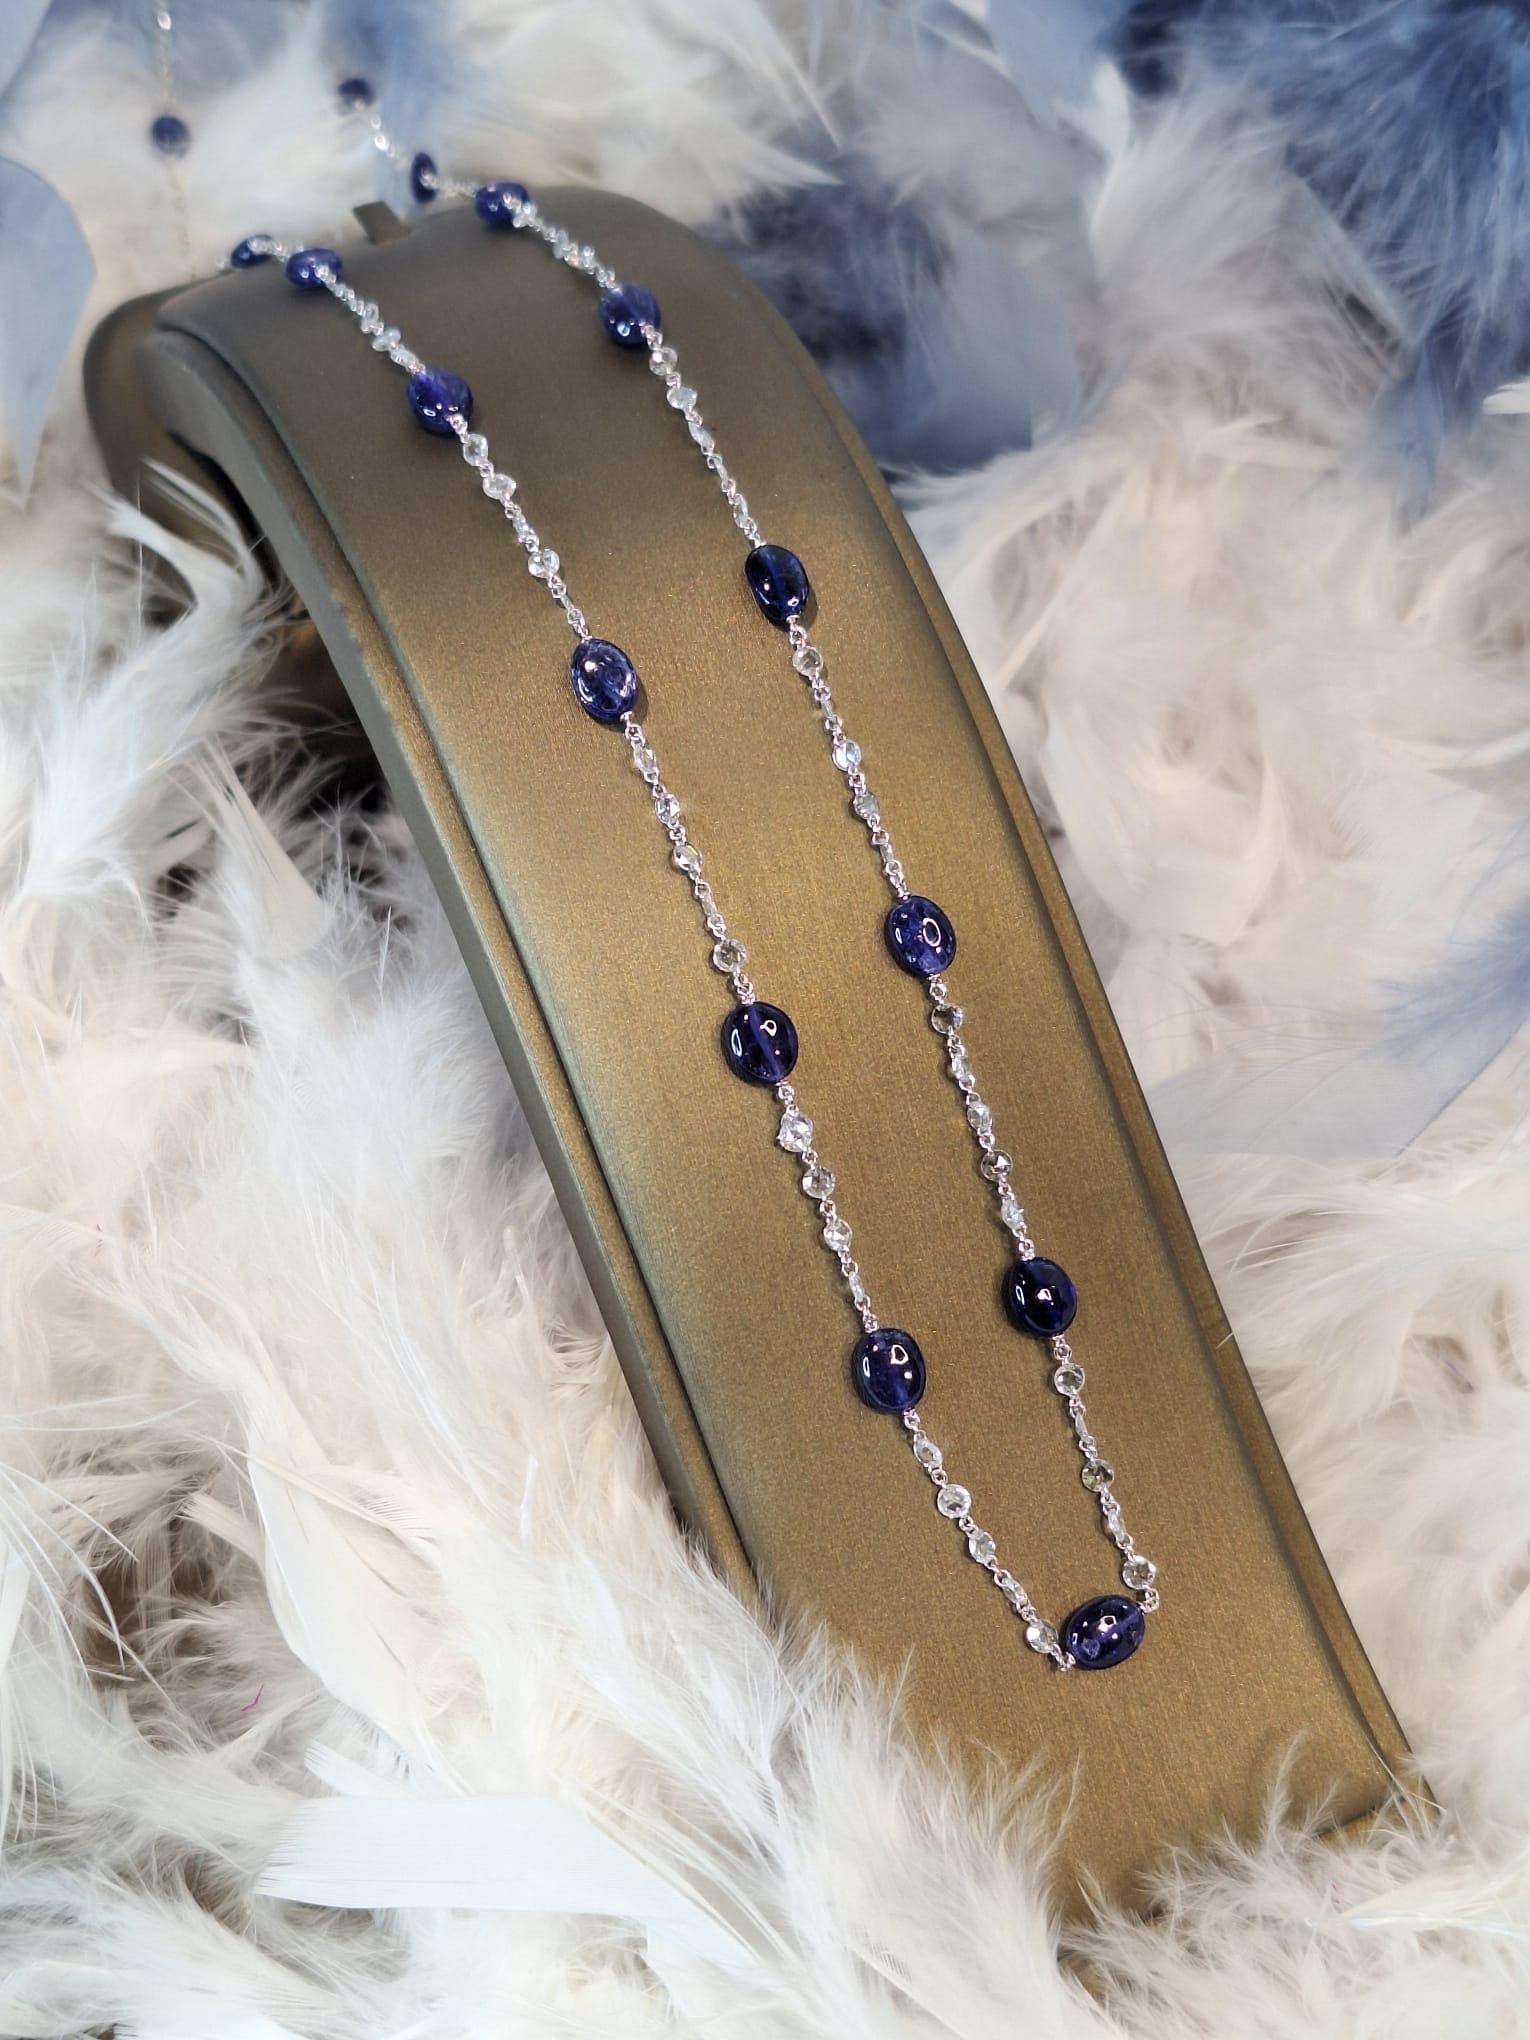 Women's 18K White Gold Diamond Necklace with Tanzanite For Sale